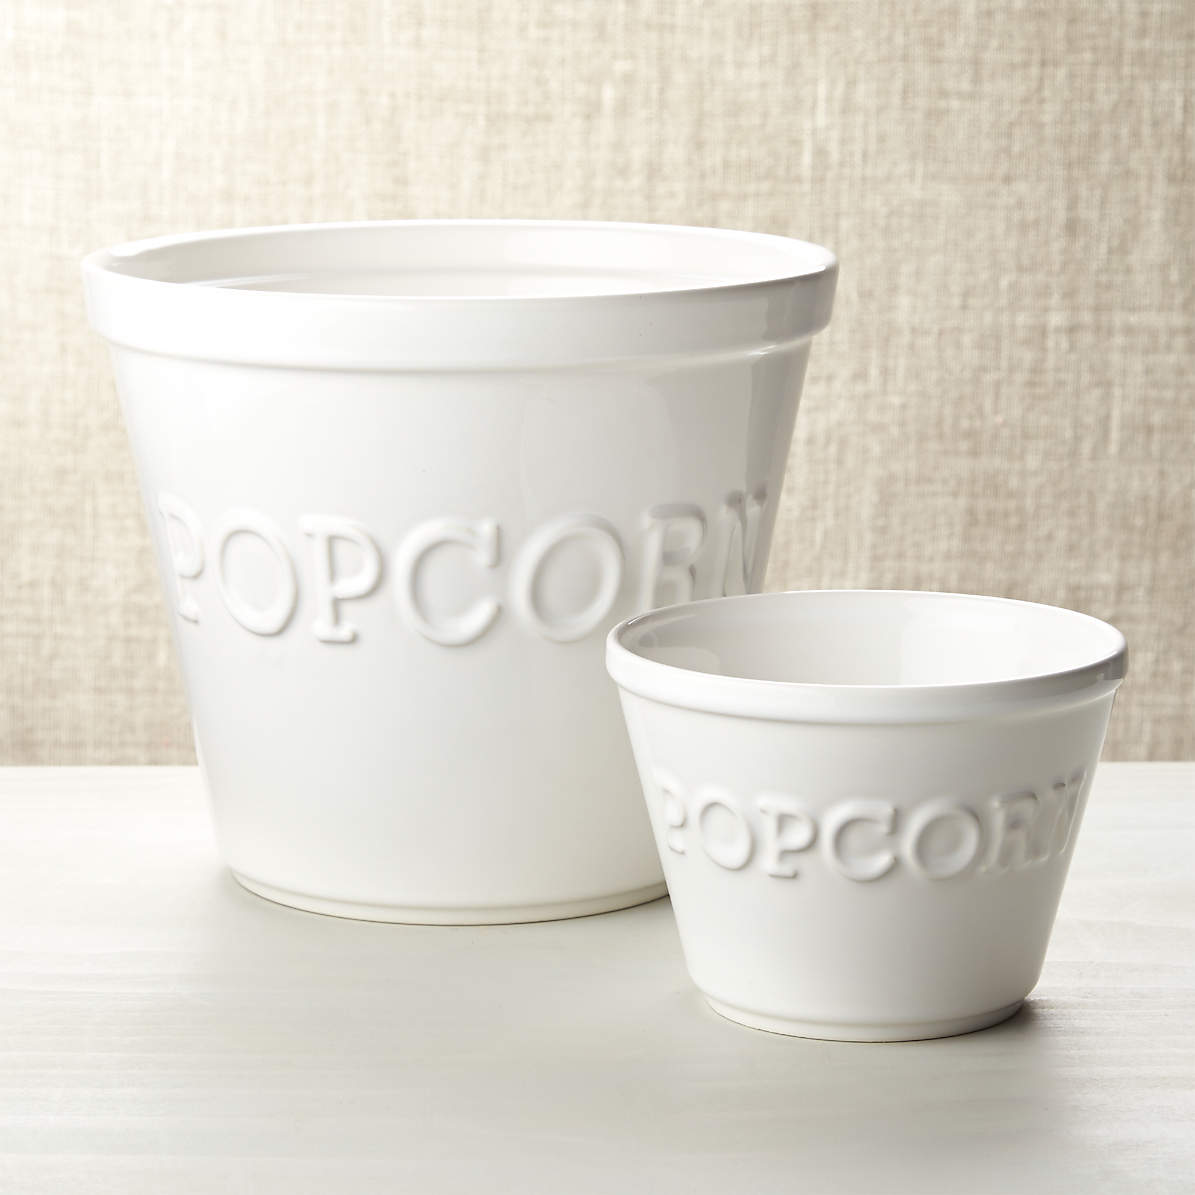 Novelty Ceramic Square Popcorn Bowl Containers 2 ct Basket 